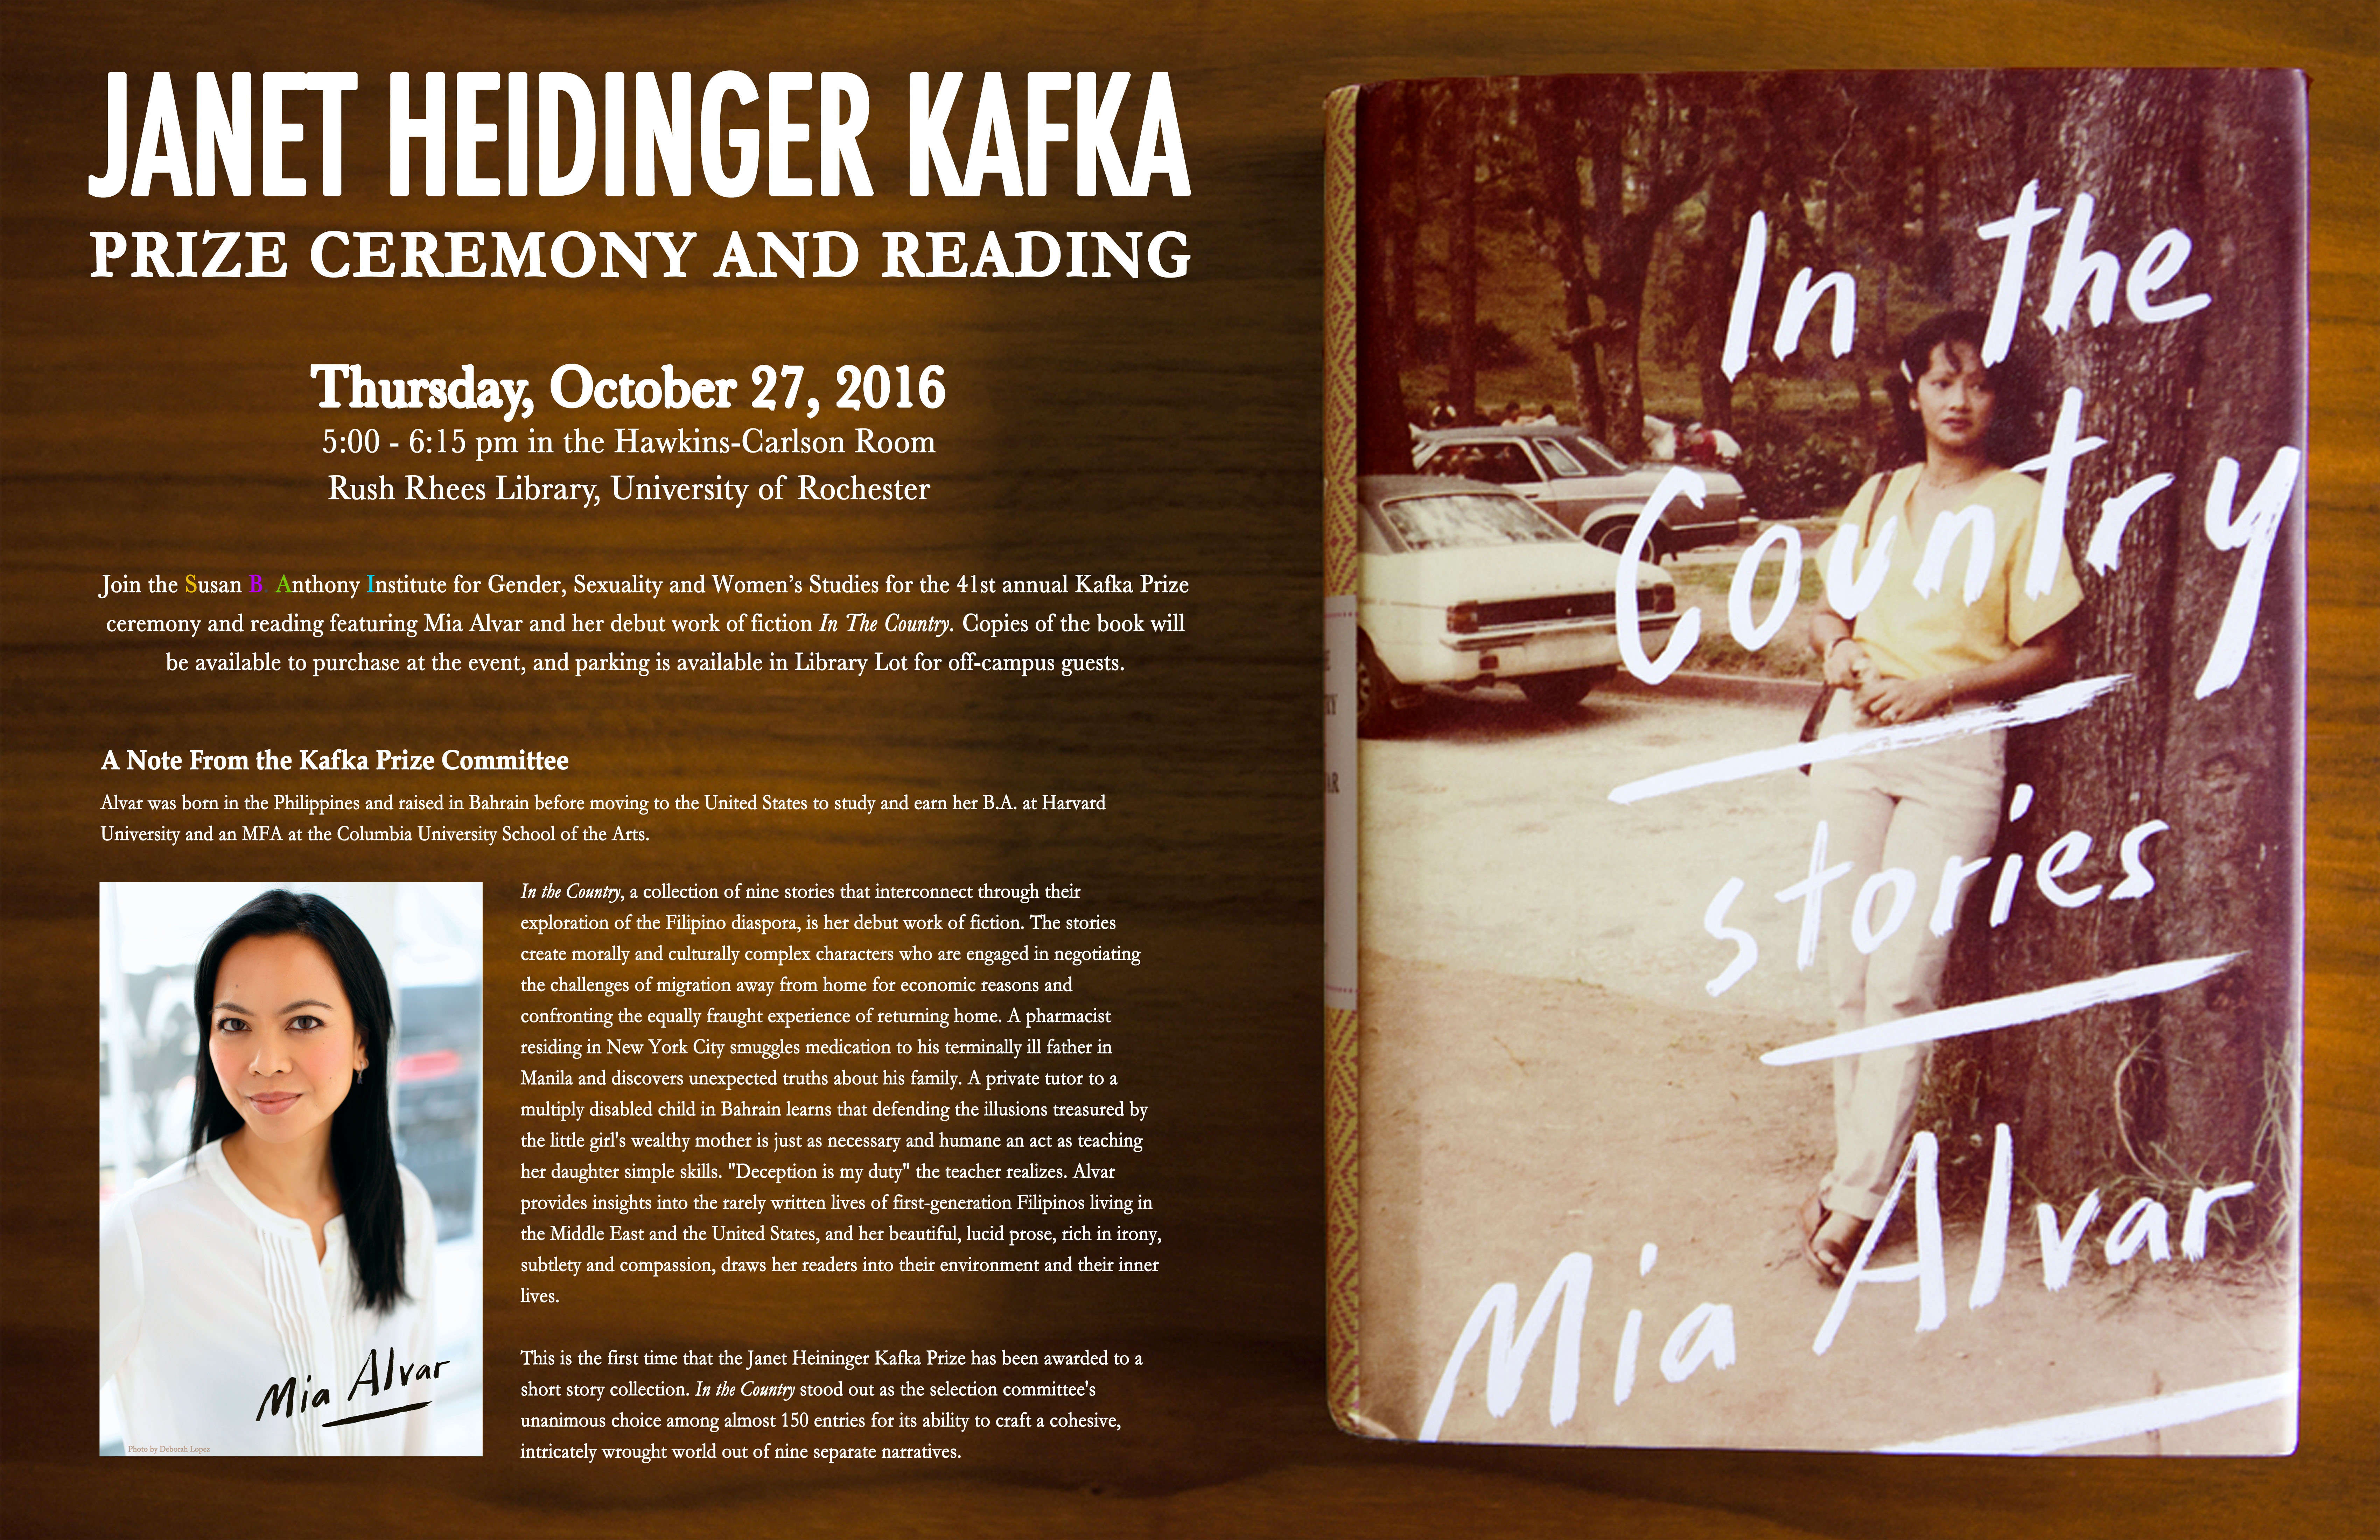 Poster advertising the Kafka event with image of the book and same text as the event page